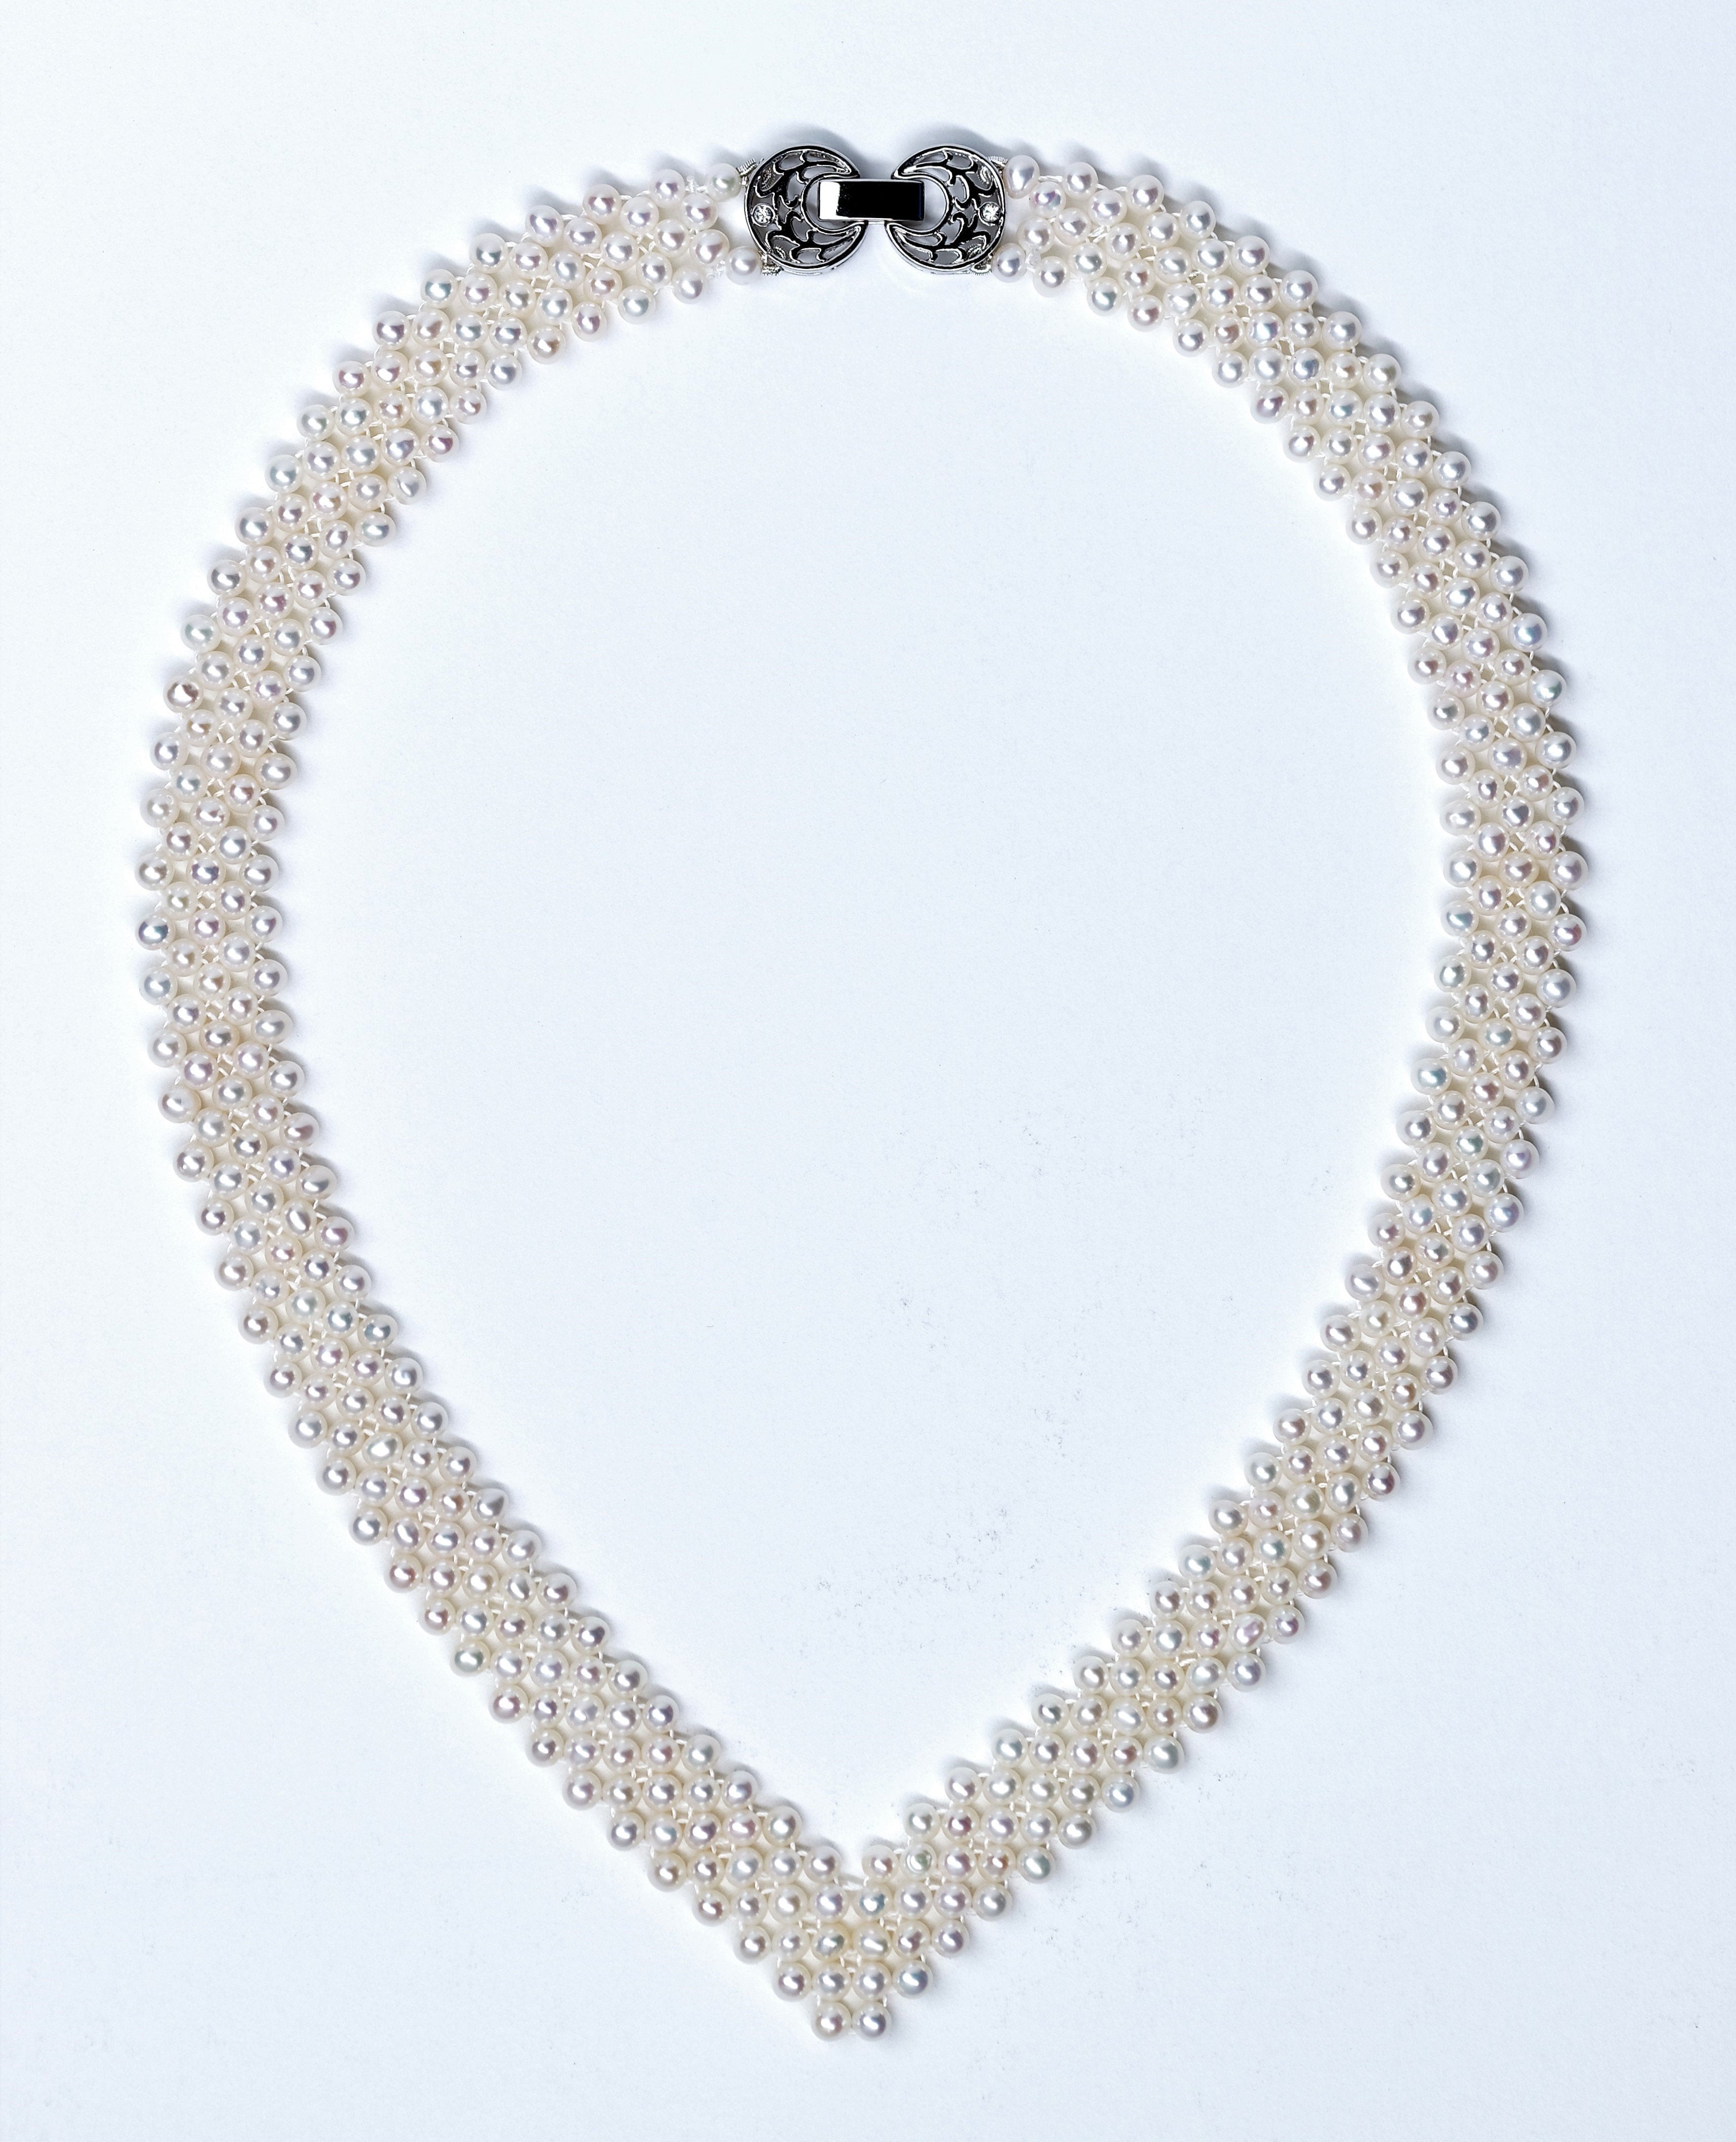 Neck Baby Pearl Necklace